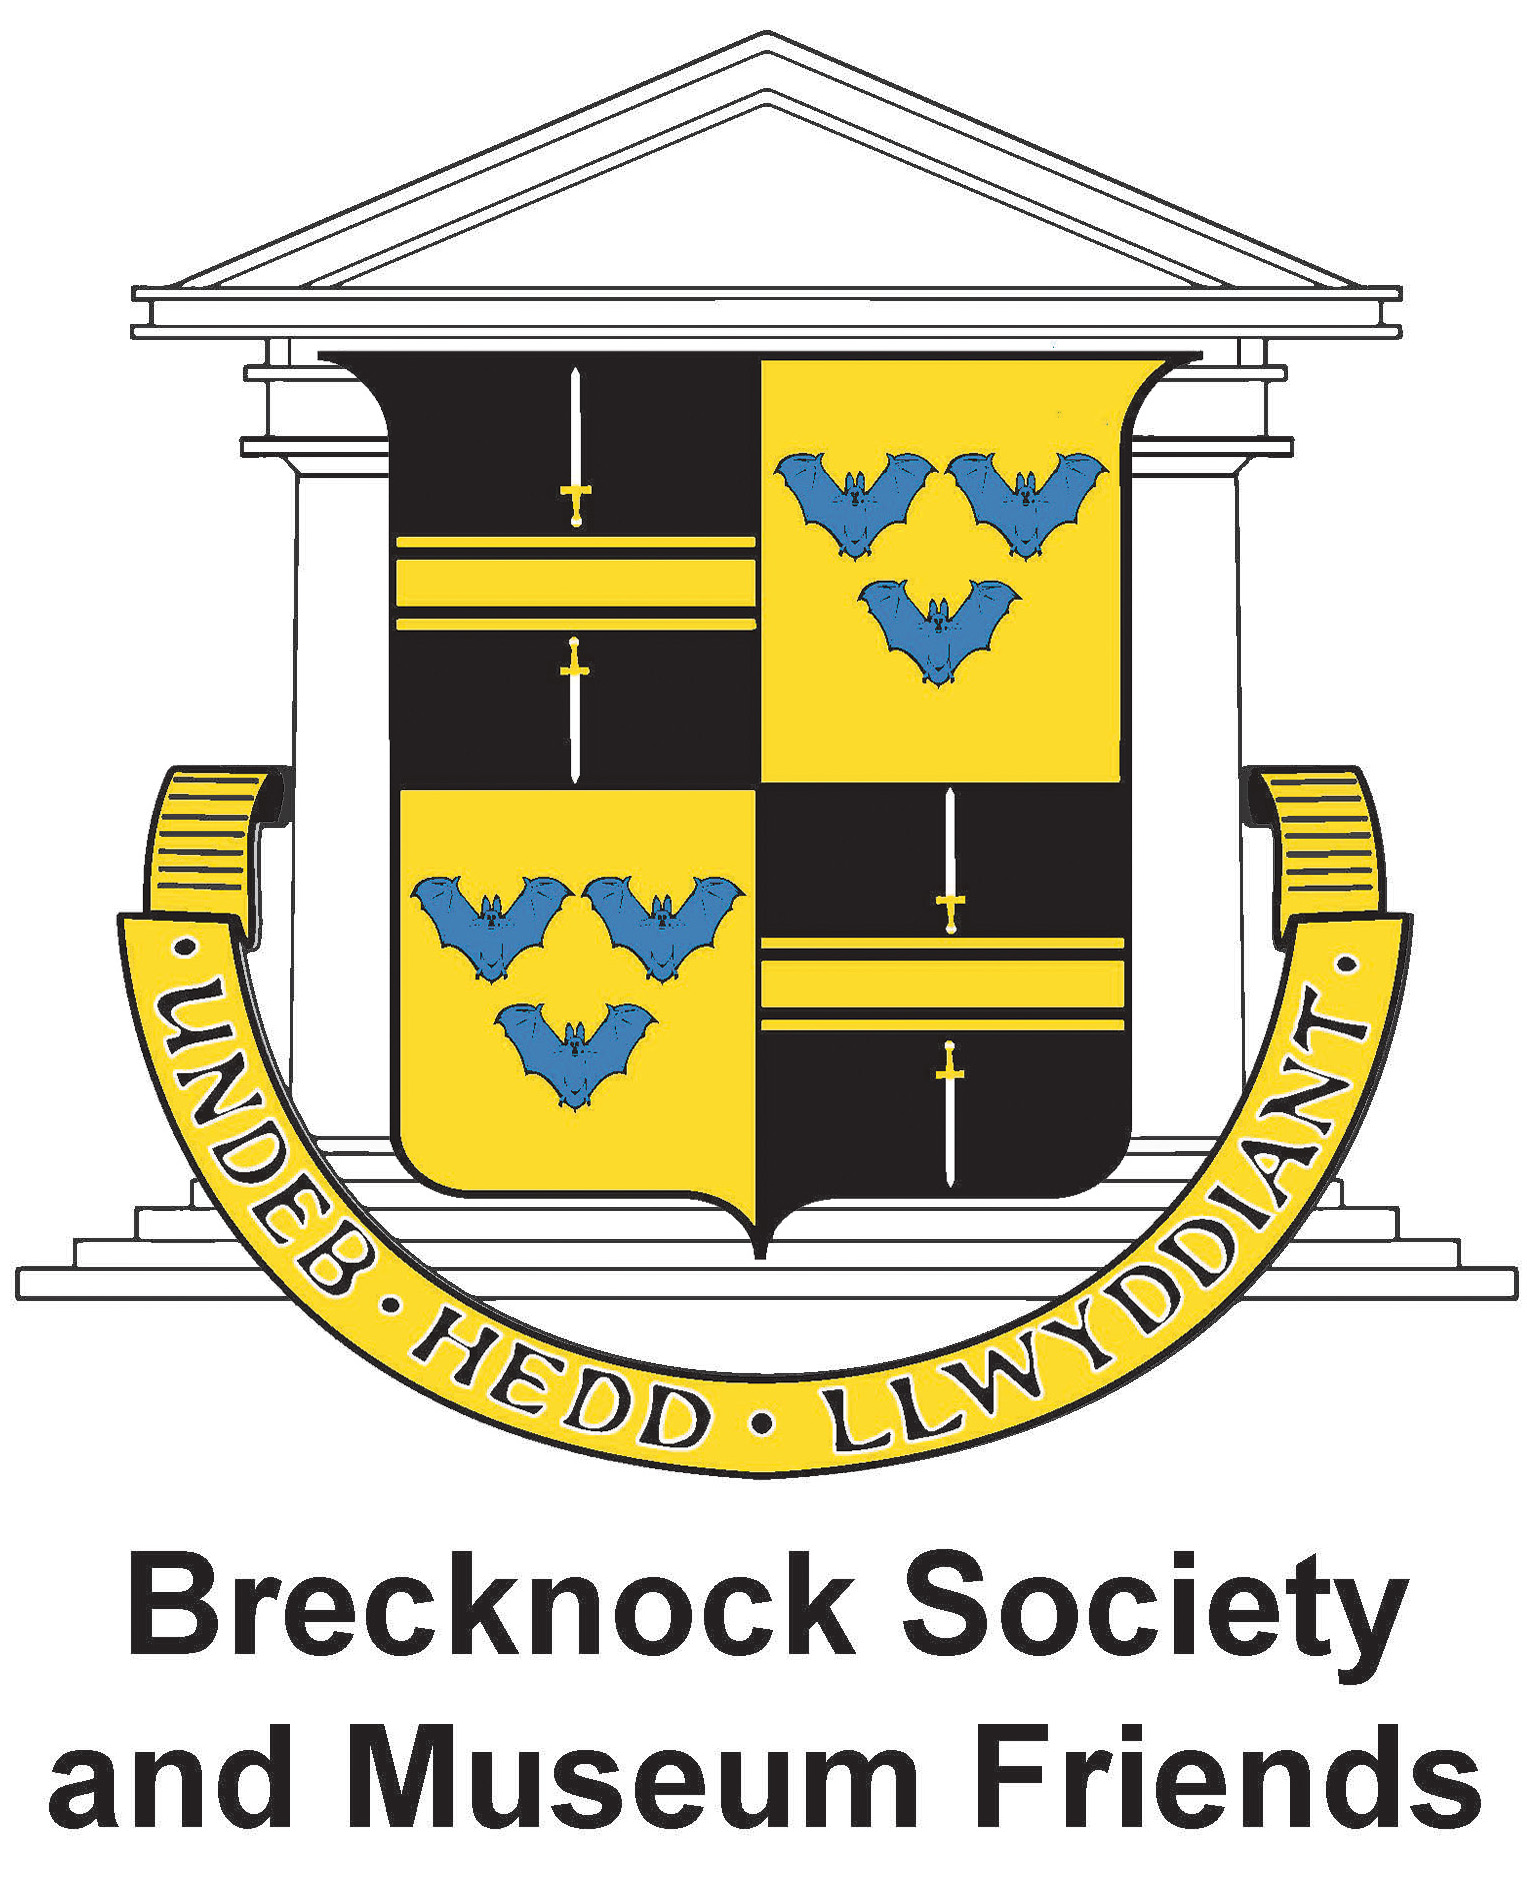 Brecknock Society and Museum Friends logo